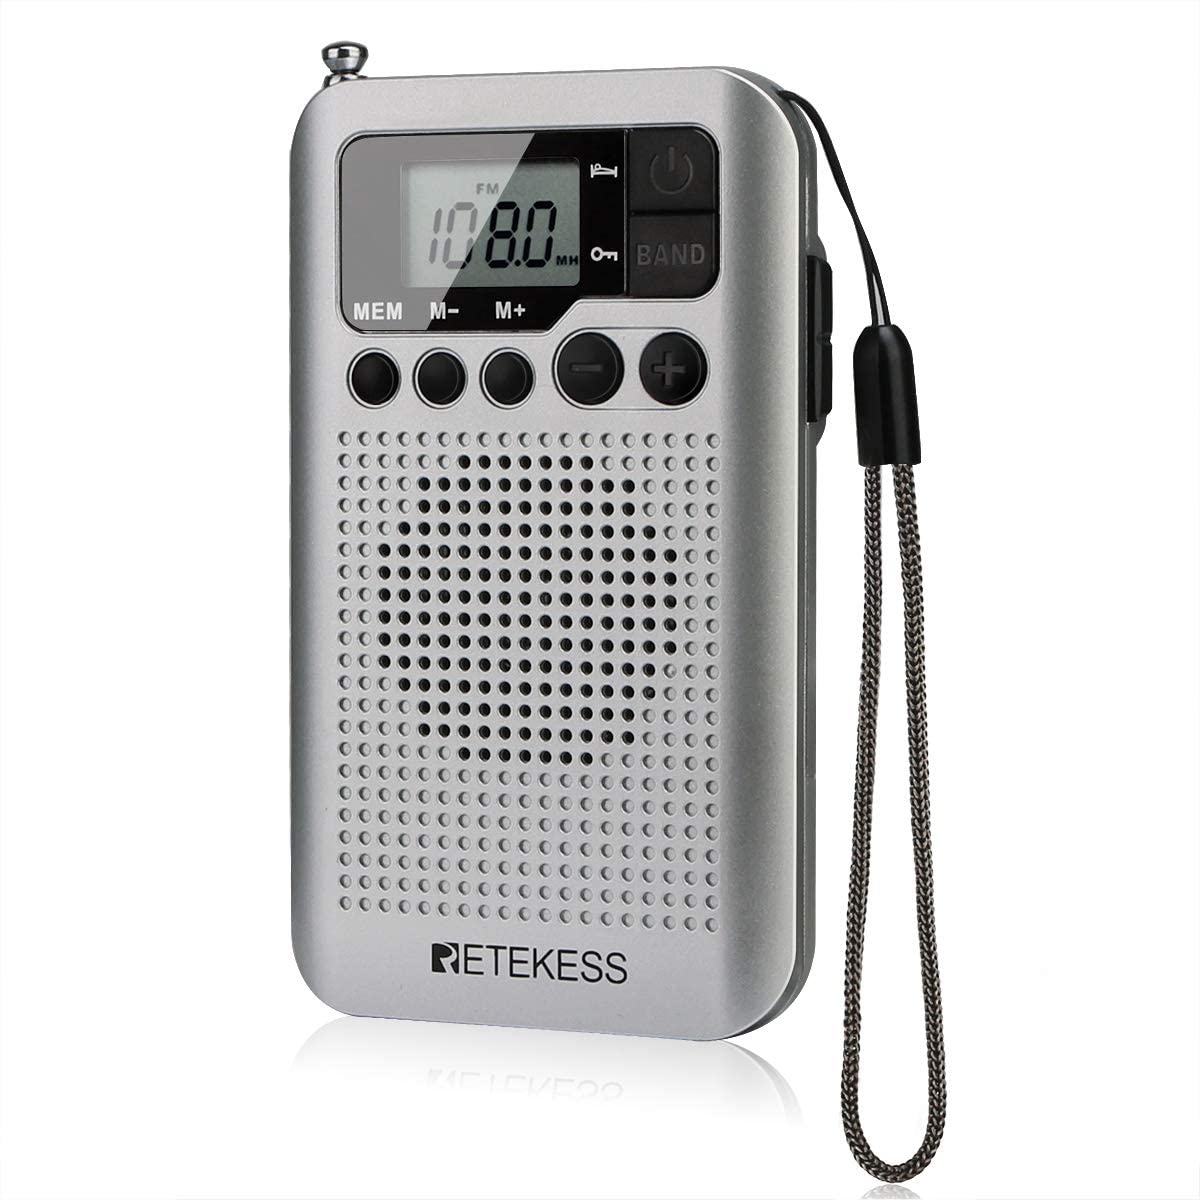 Retekess TR106 Portable Mini Pocket Radios AM FM Digital Tuning, AAA Battery Powered, Support Clock, Alarm, Sleep Timer, FM Stereo for Walking,Thansgiving Christmas New Year Gift(Silver) - image 1 of 10